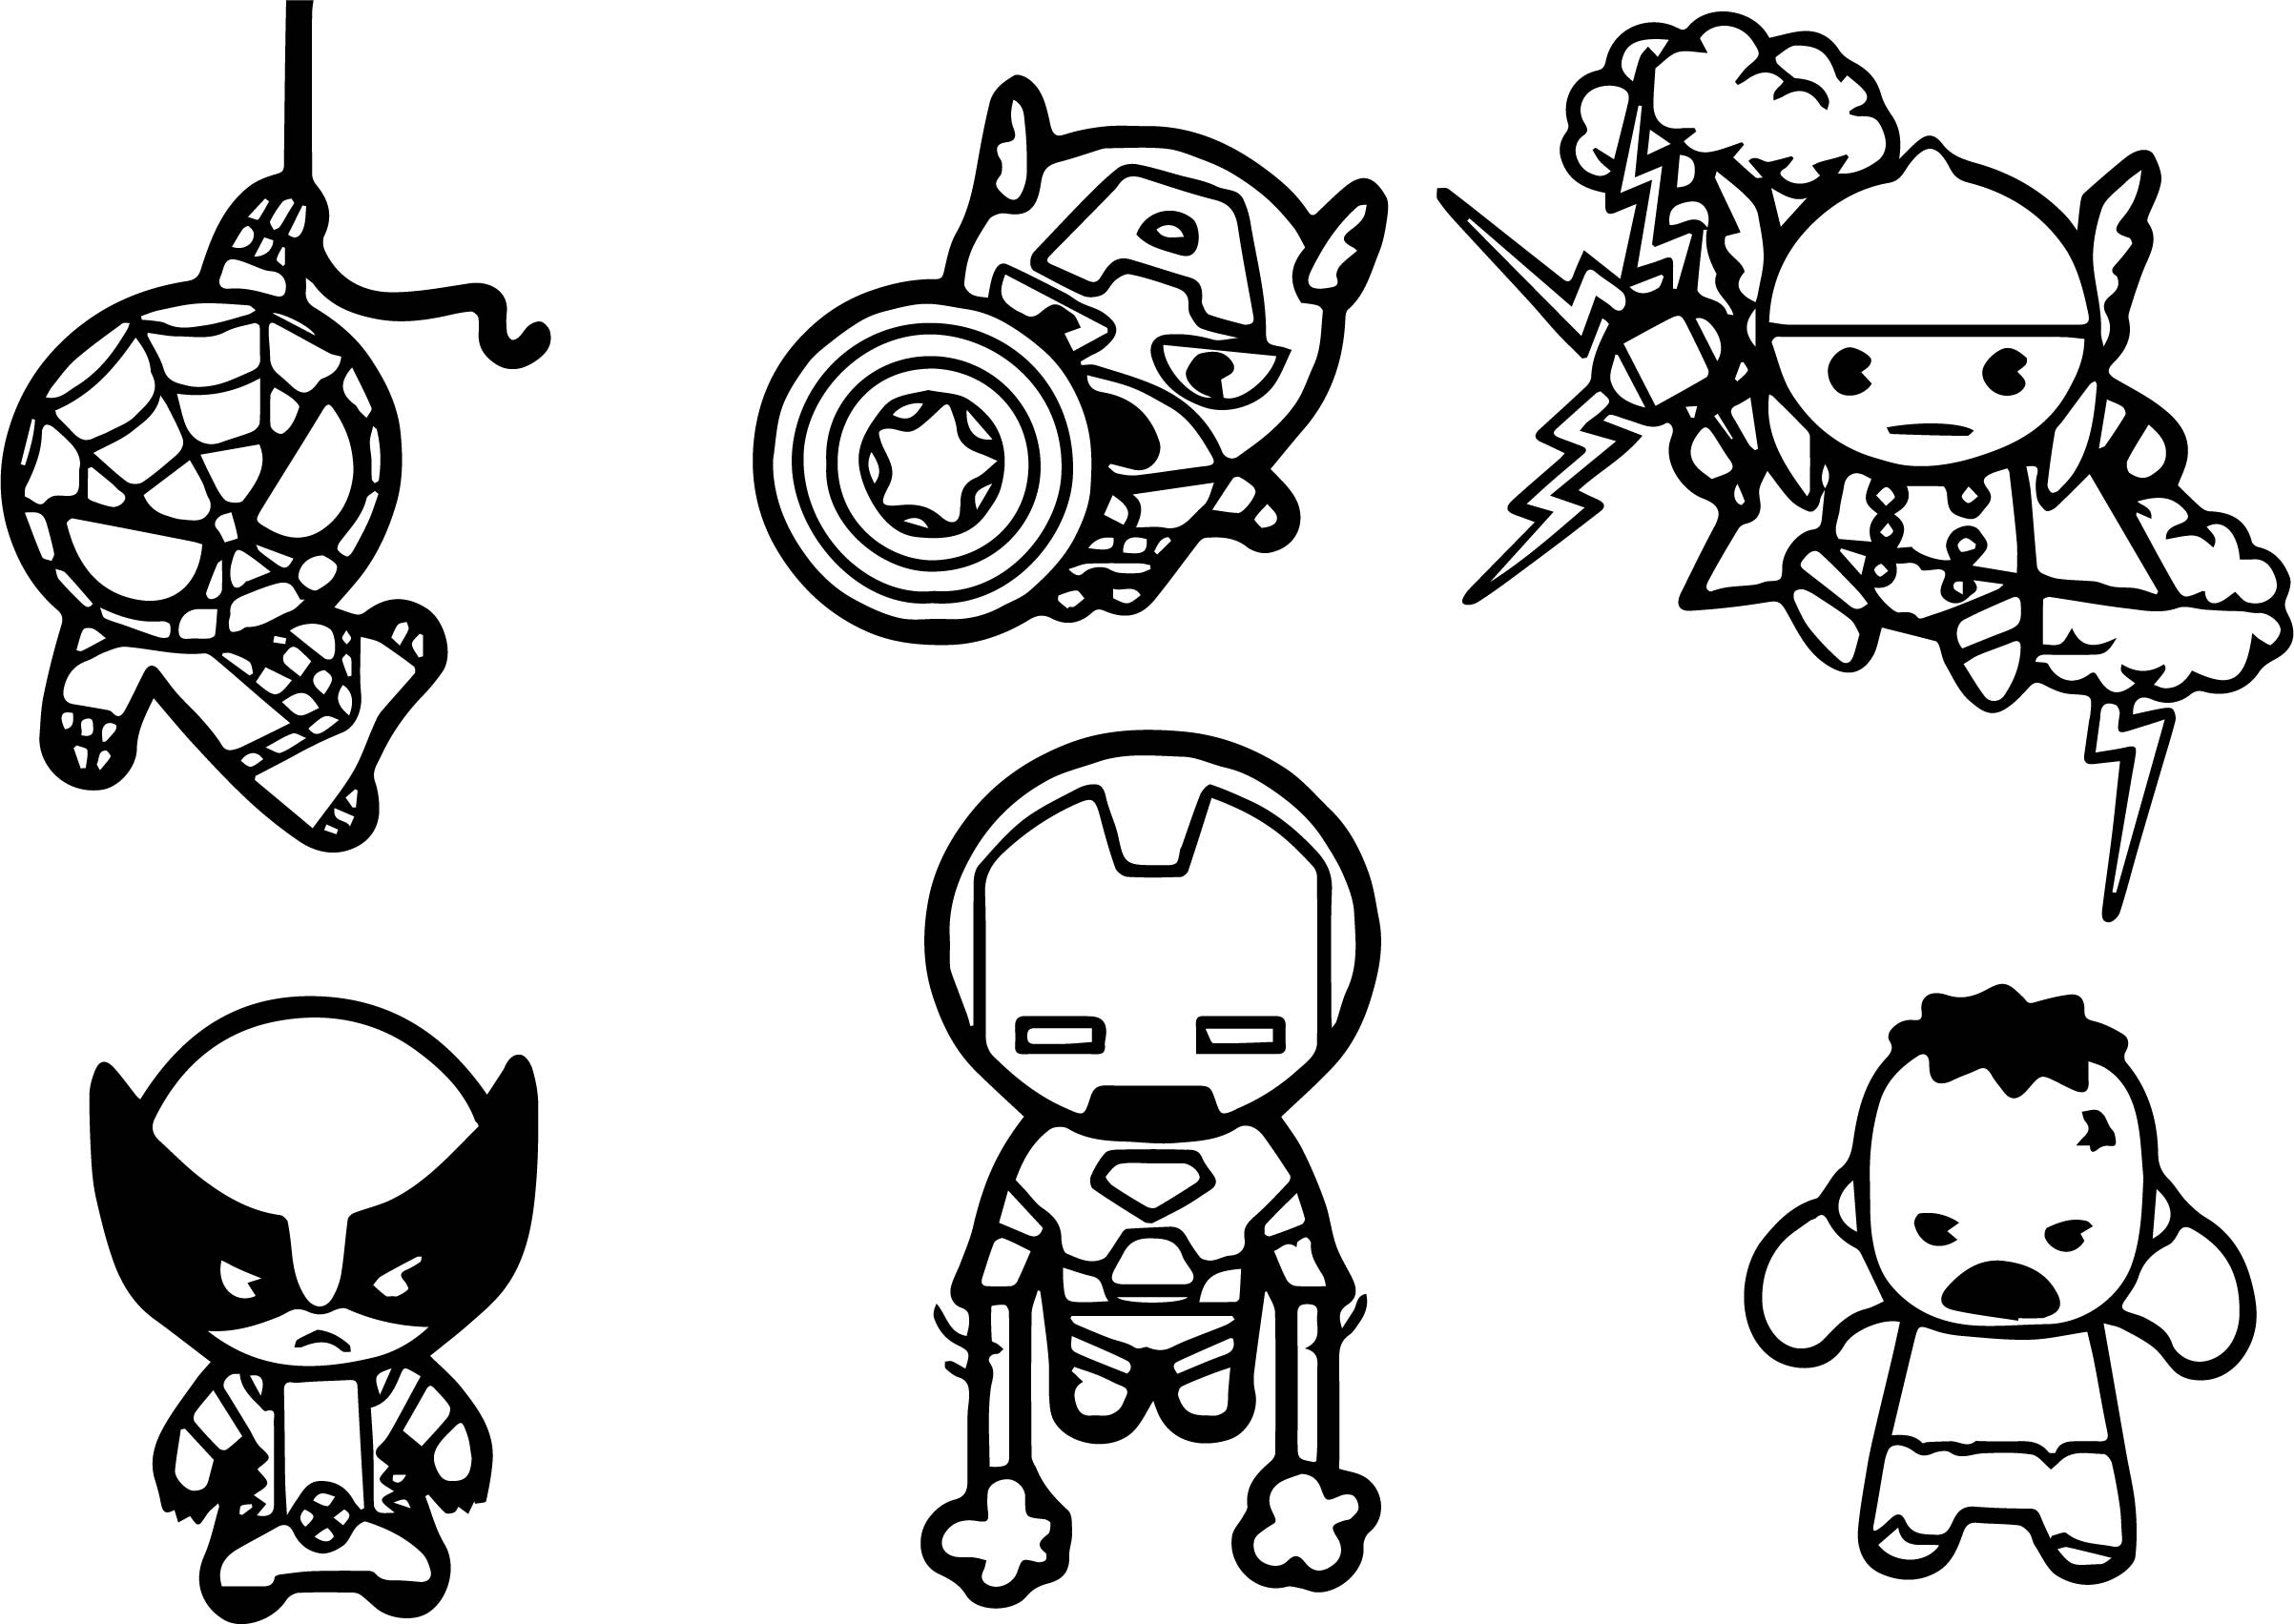 Drawing Avengers #74085 (Superheroes) – Printable coloring pages